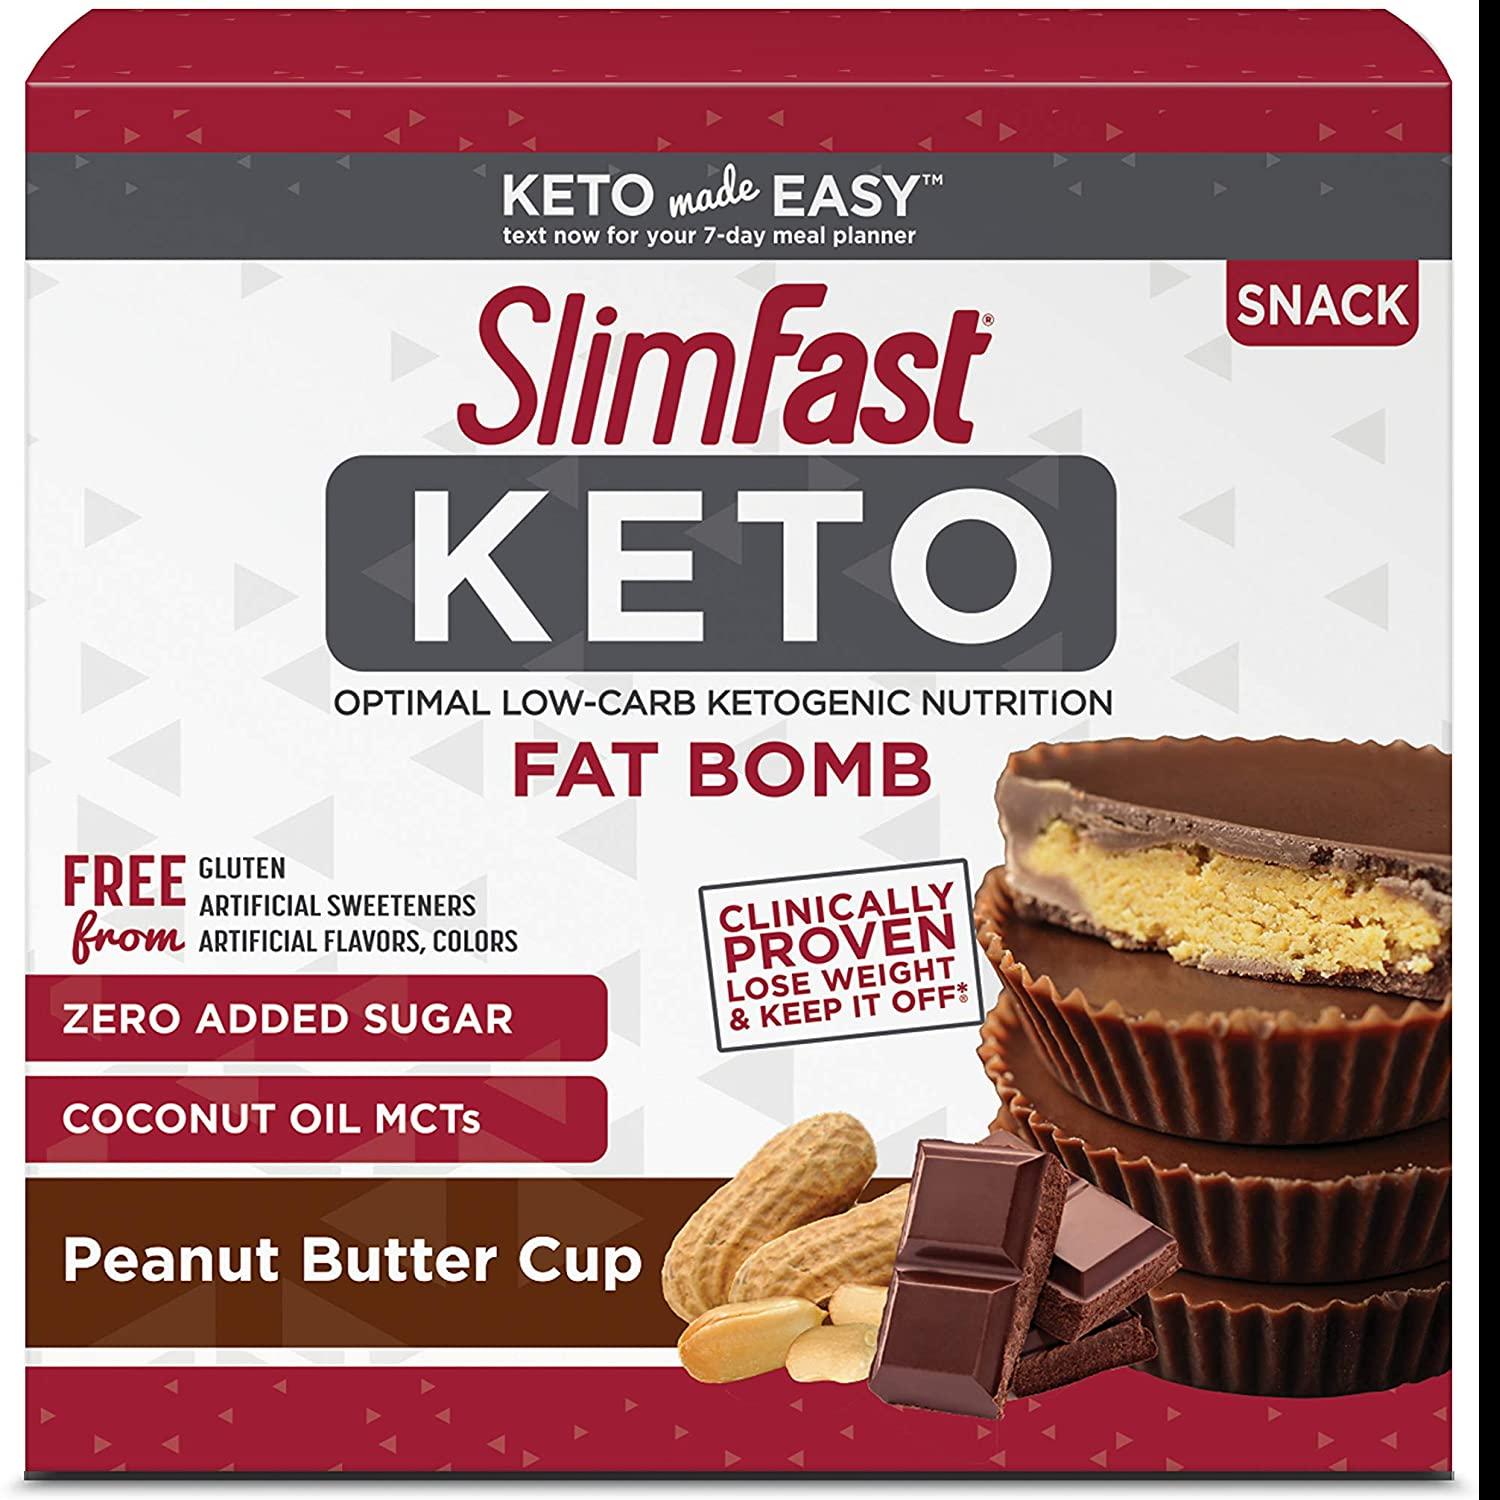 14 SlimFast Keto Fat Bomb Peanut Butter Cup Snacks for $7.49 Shipped